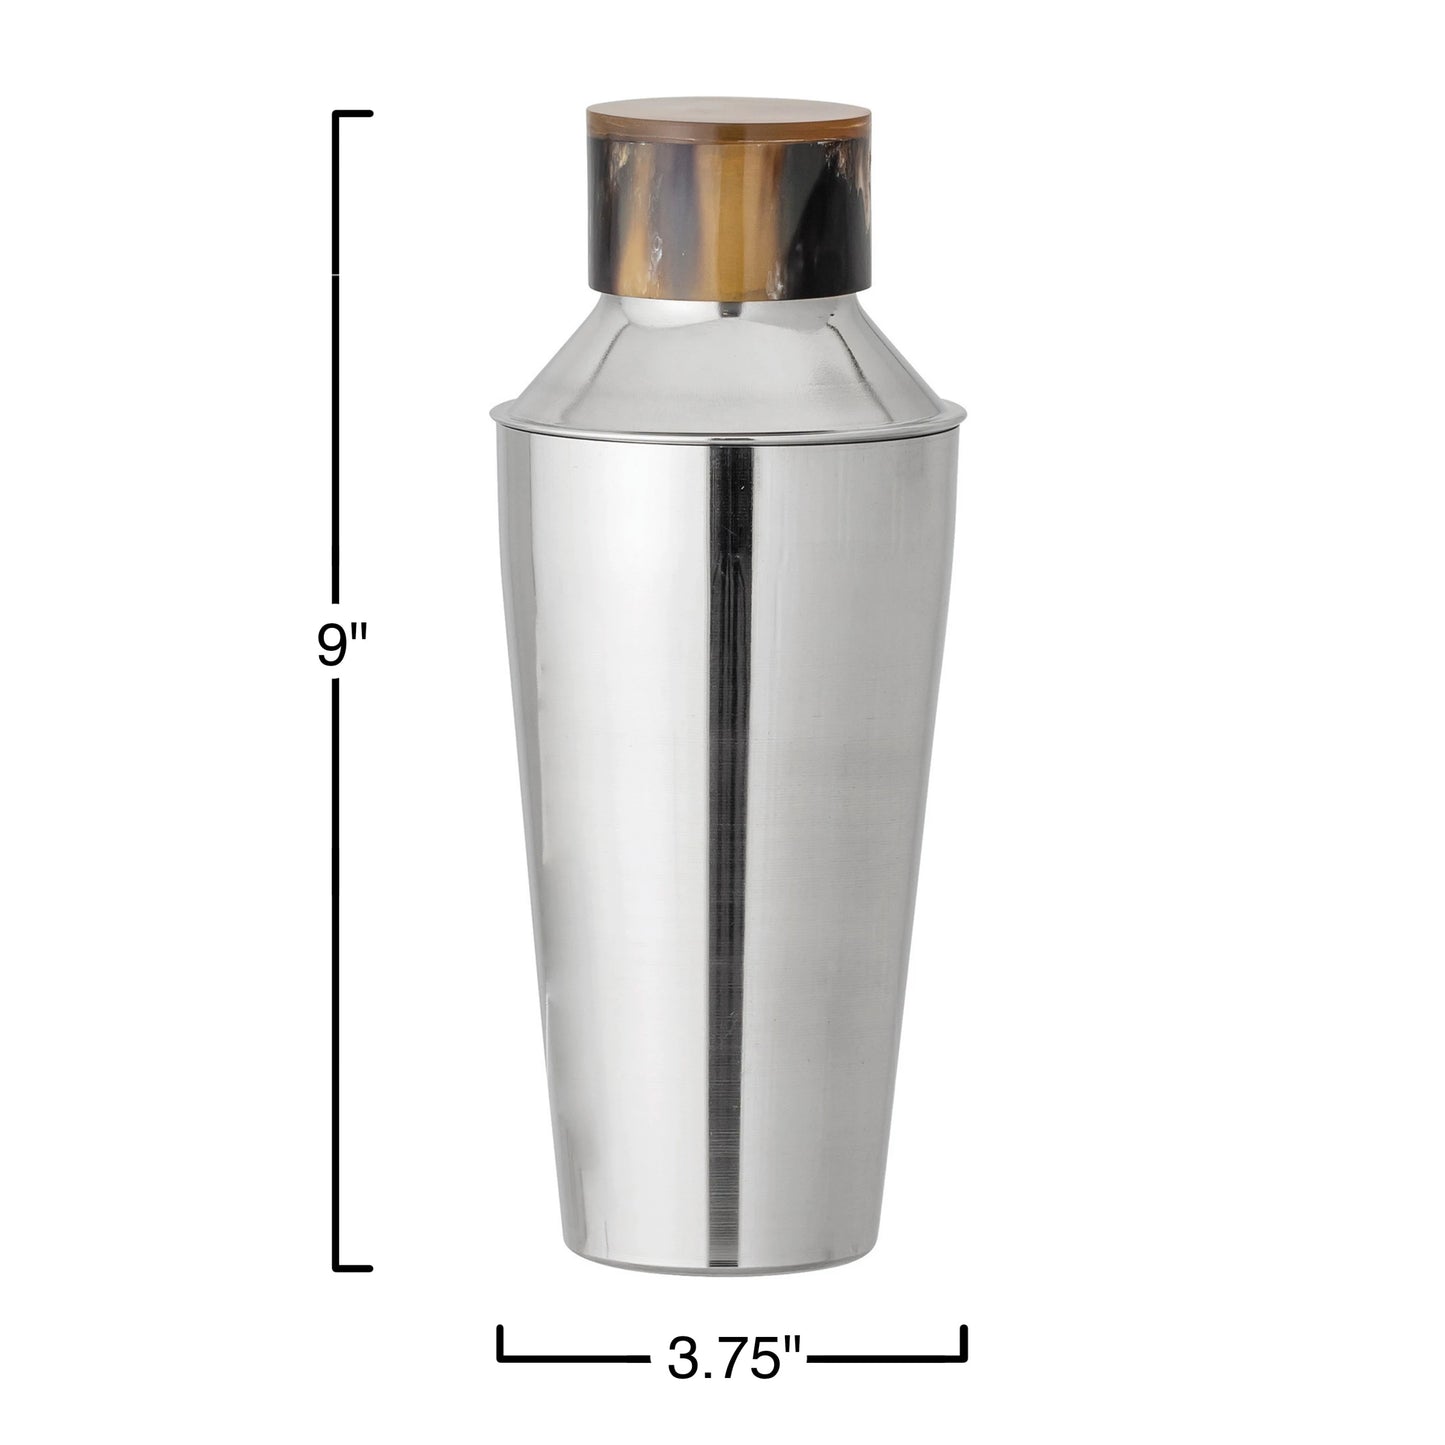 Cocktail Shaker with Horn Top Size